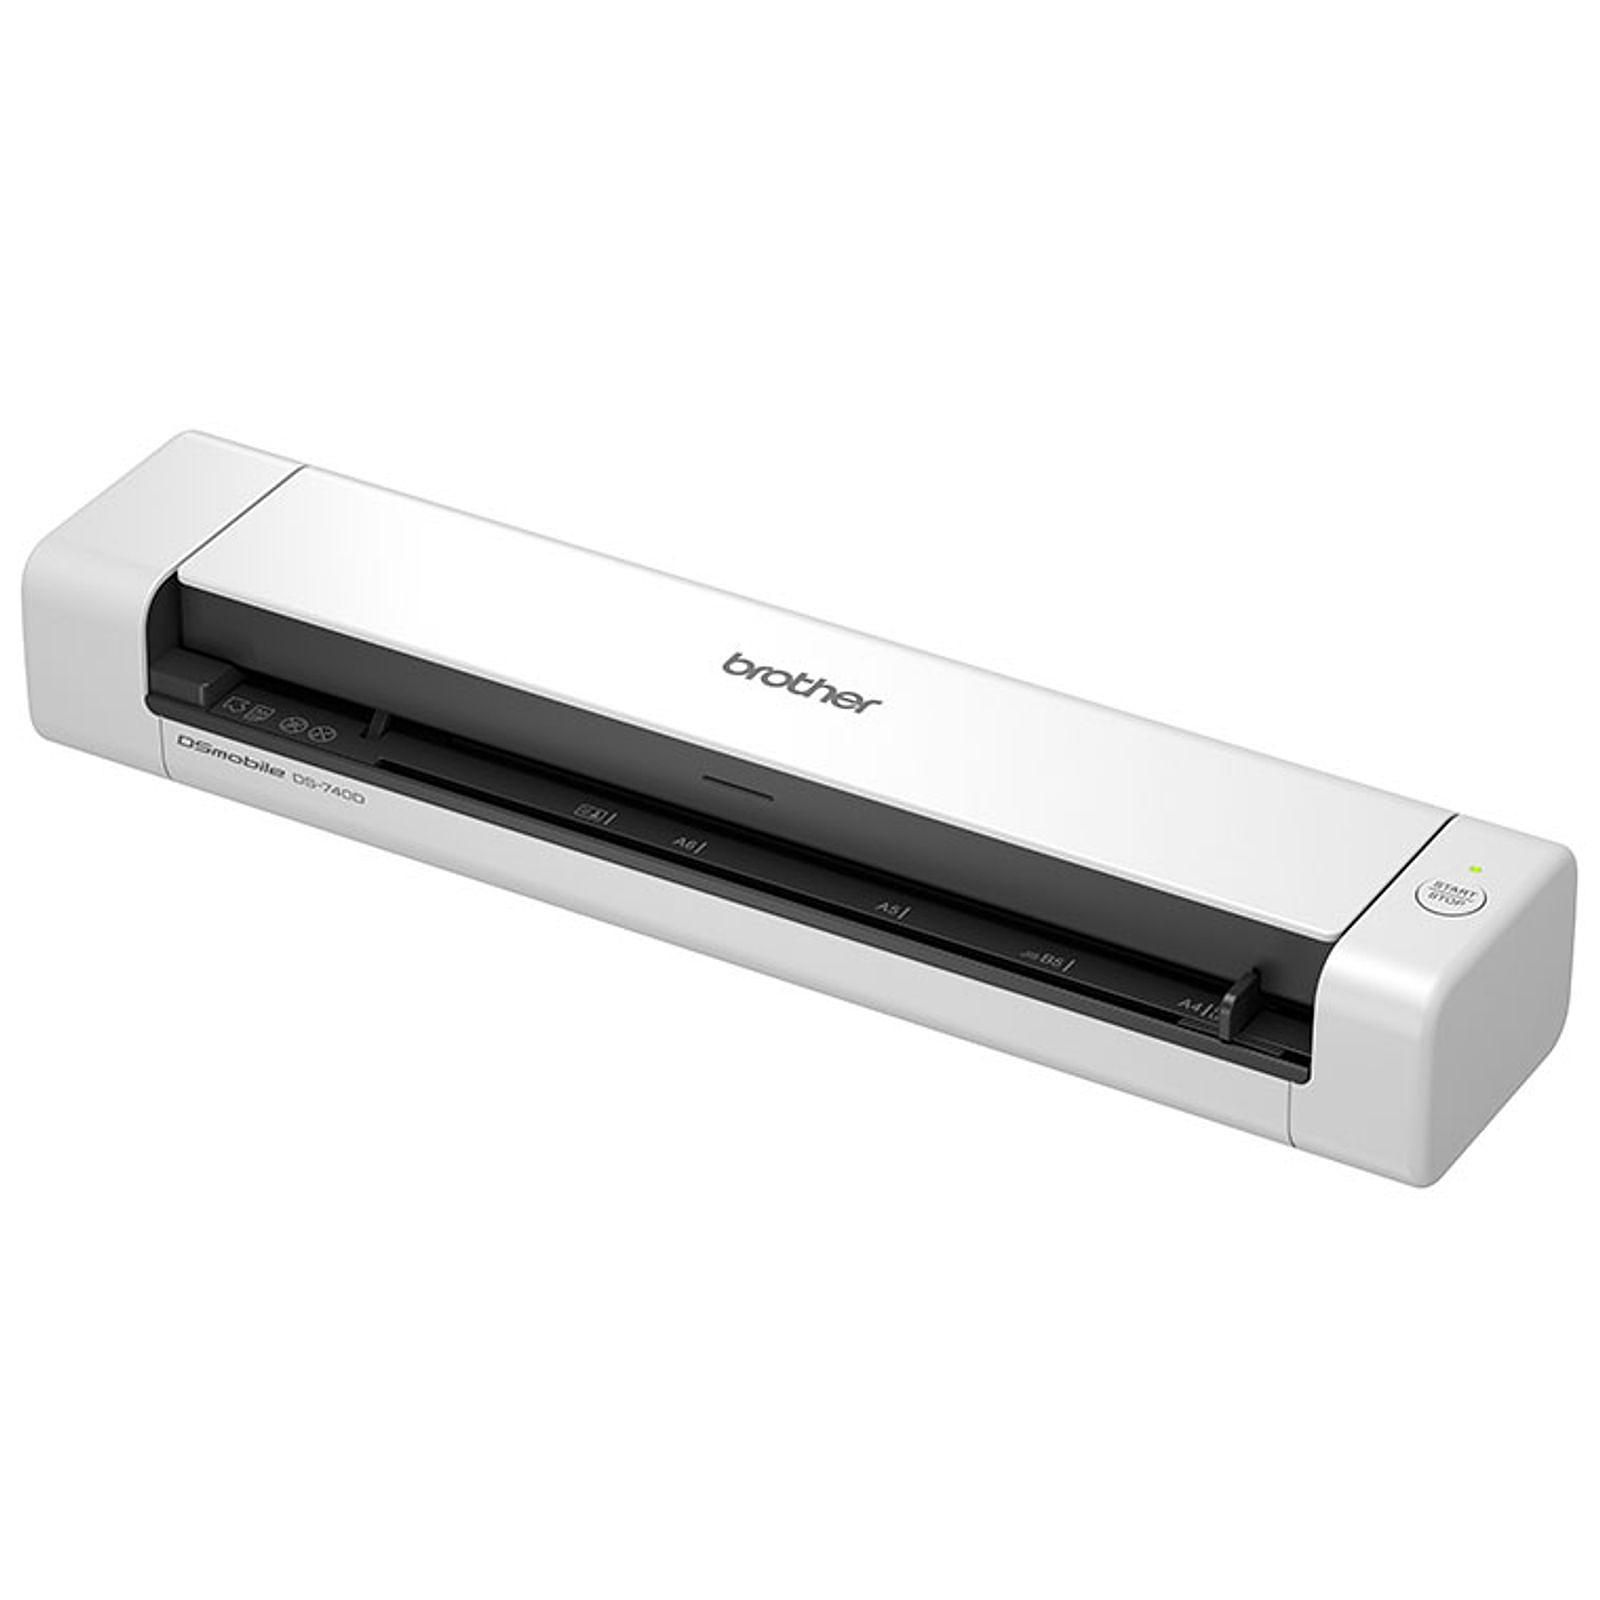 Brother DS-740D - Scanner Brother - grosbill-pro.com - 2